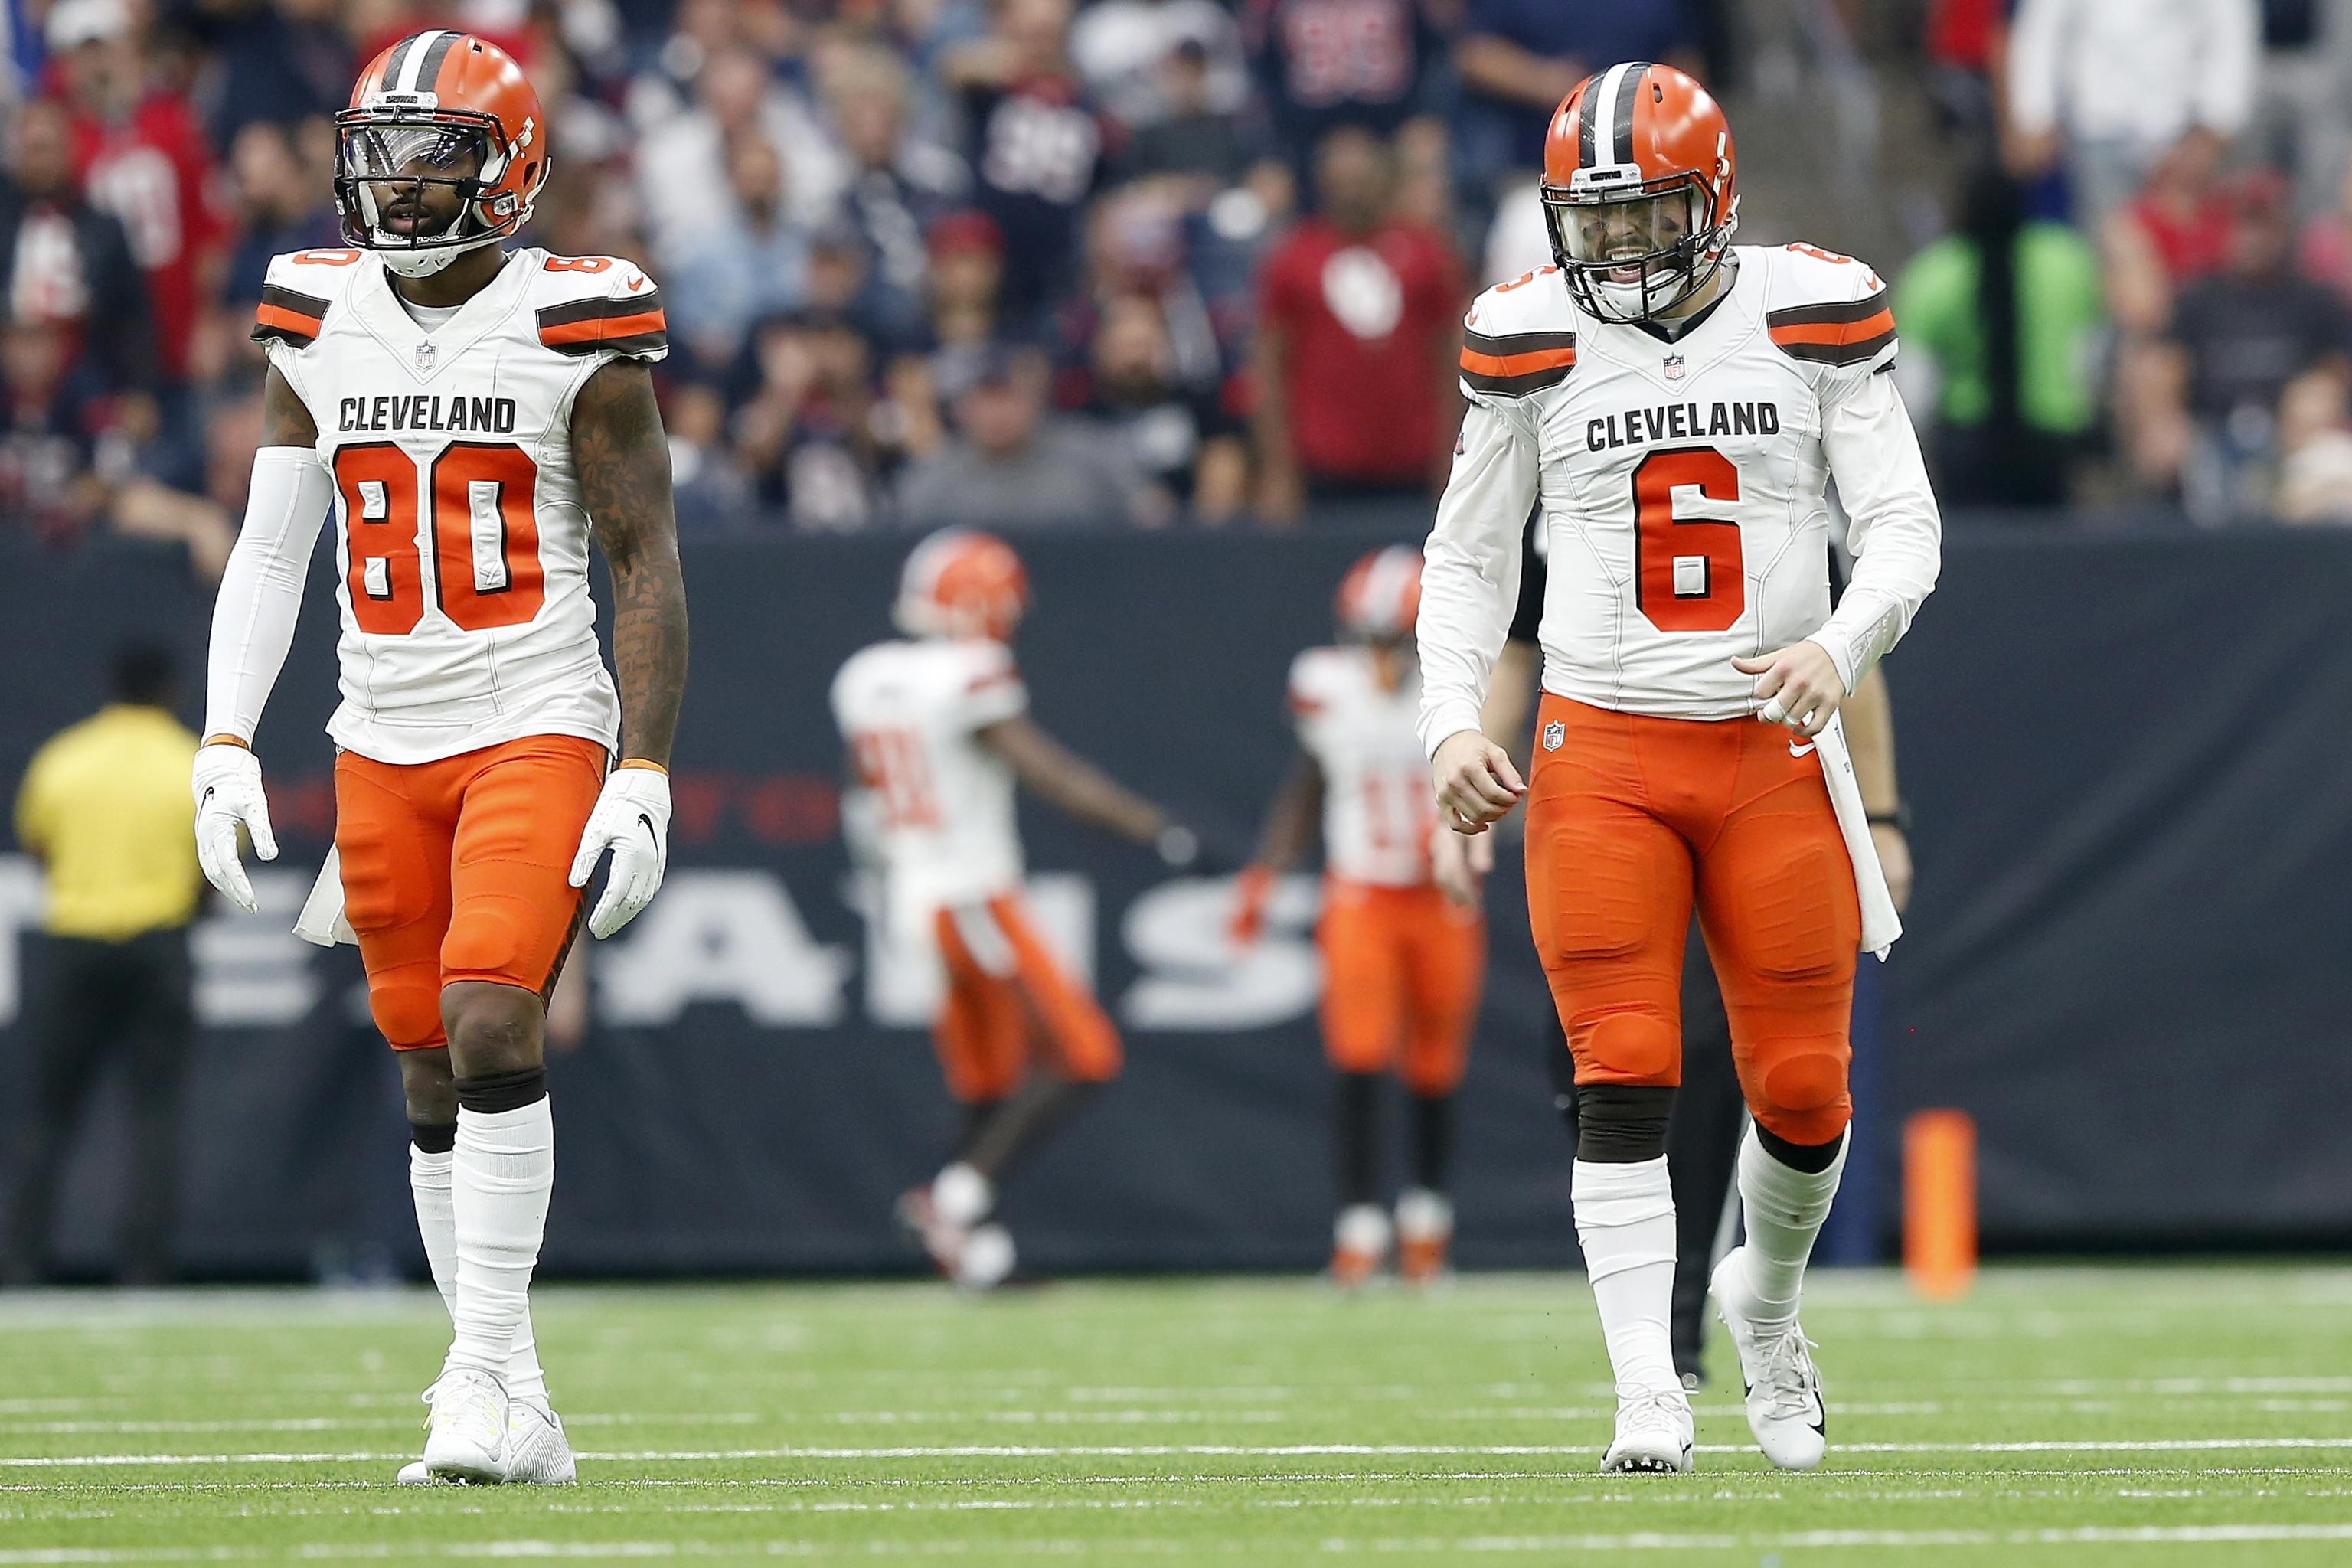 Browns Schedule / Game logs for the cleveland browns, including schedule and previous game